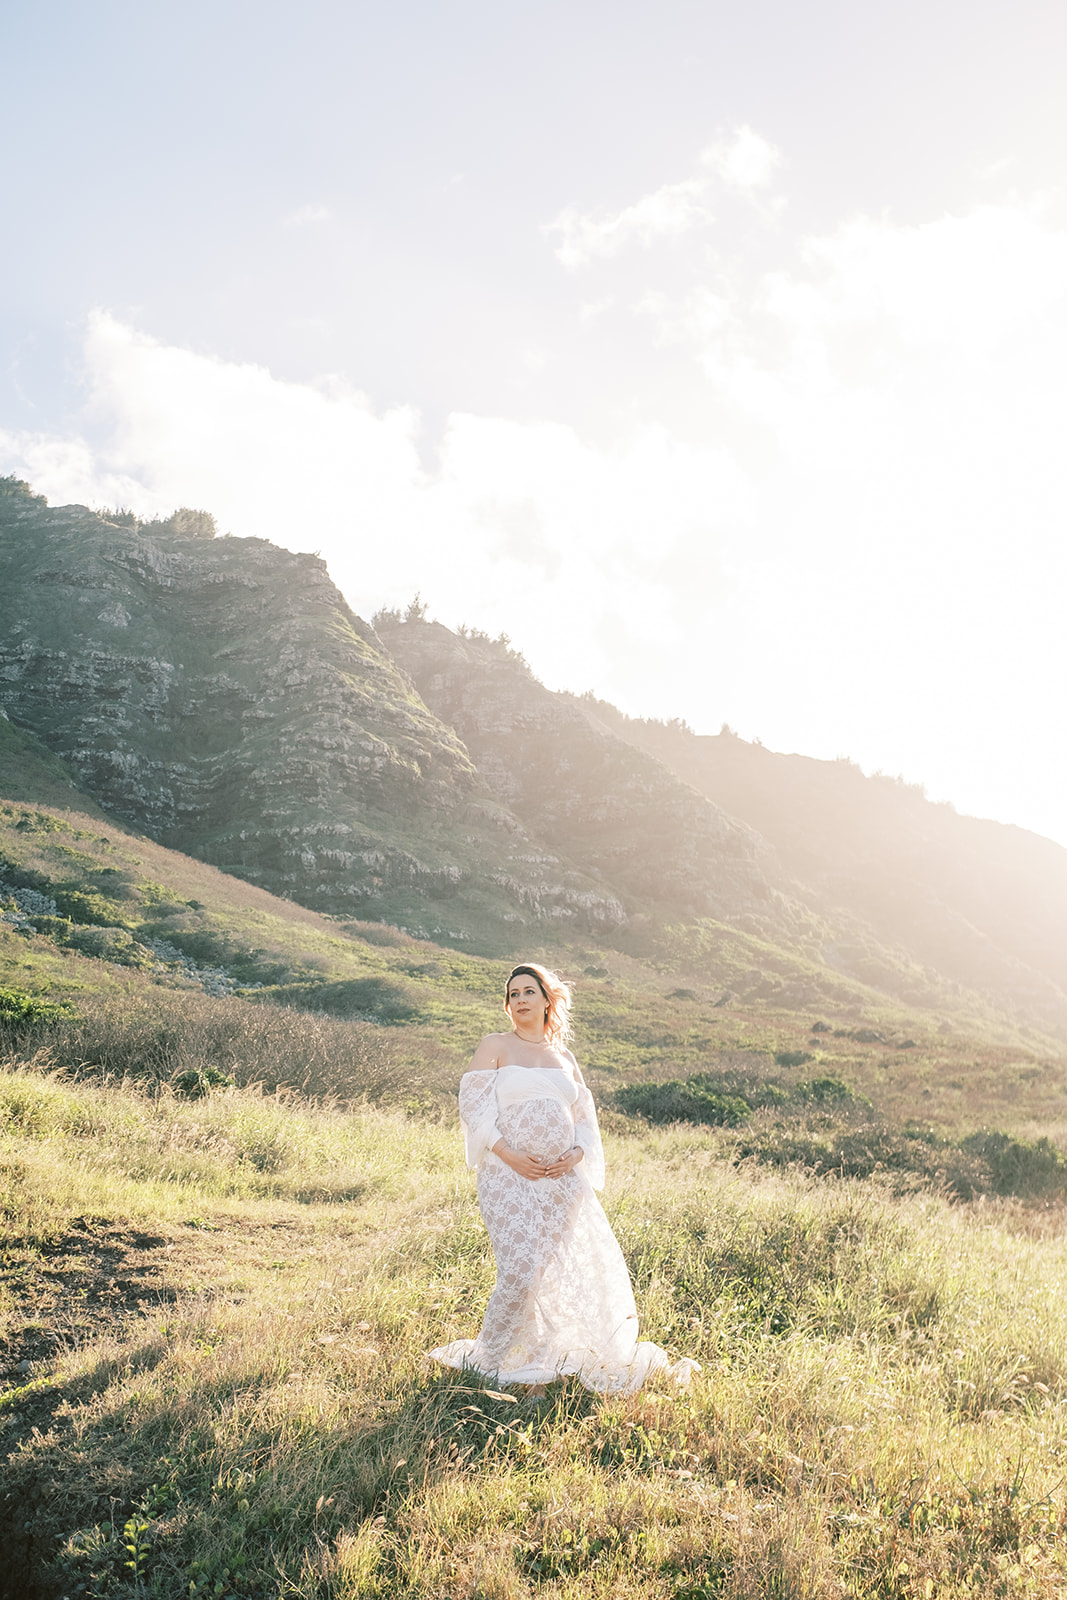 A pregnant woman in a white lace dress standing in a sunlit field, looking away with a mountain in the background